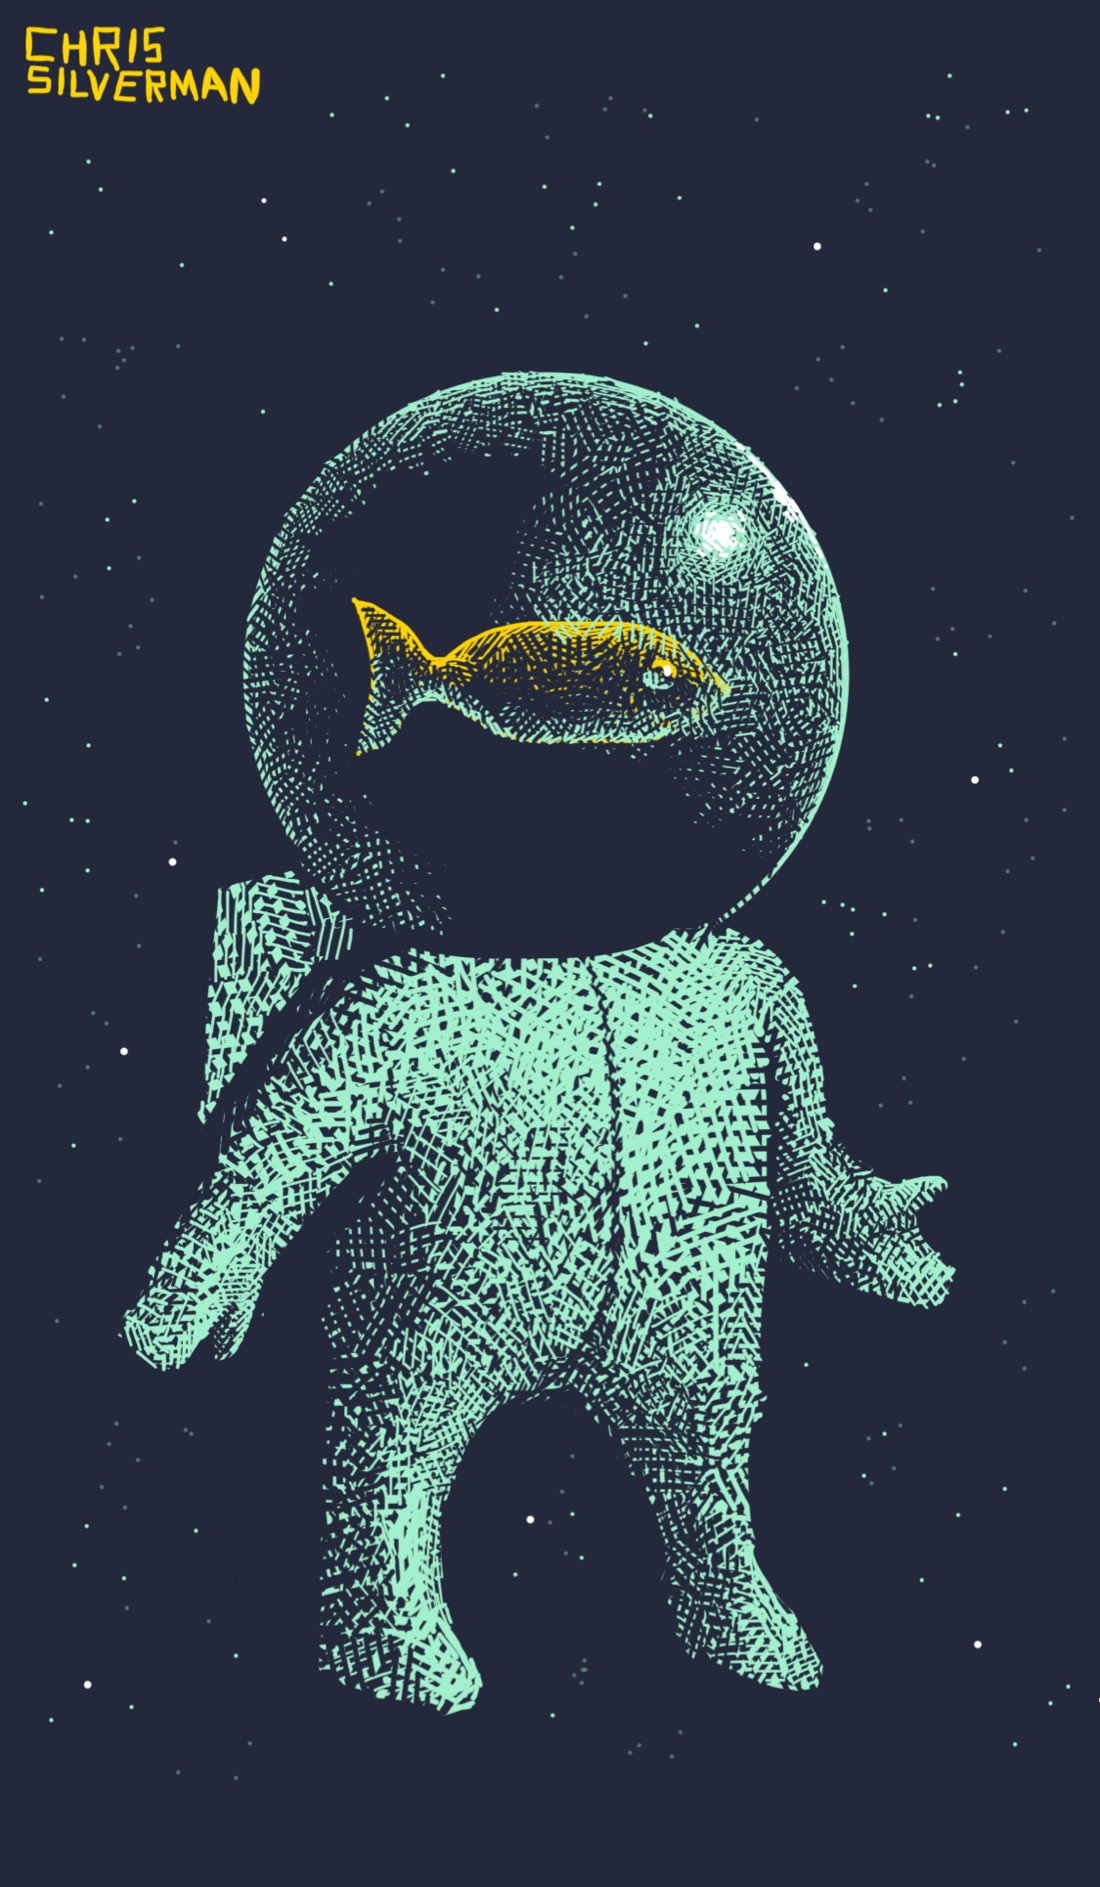 A small figure wearing a space suit, floating in space. Inside the figure's spherical glass helmet floats a goldfish. The figure is short, both arms outstretched. The stars are all around. The drawing is pale blue-green ink on a black background, with white highlights. The fish is gold-tinted.